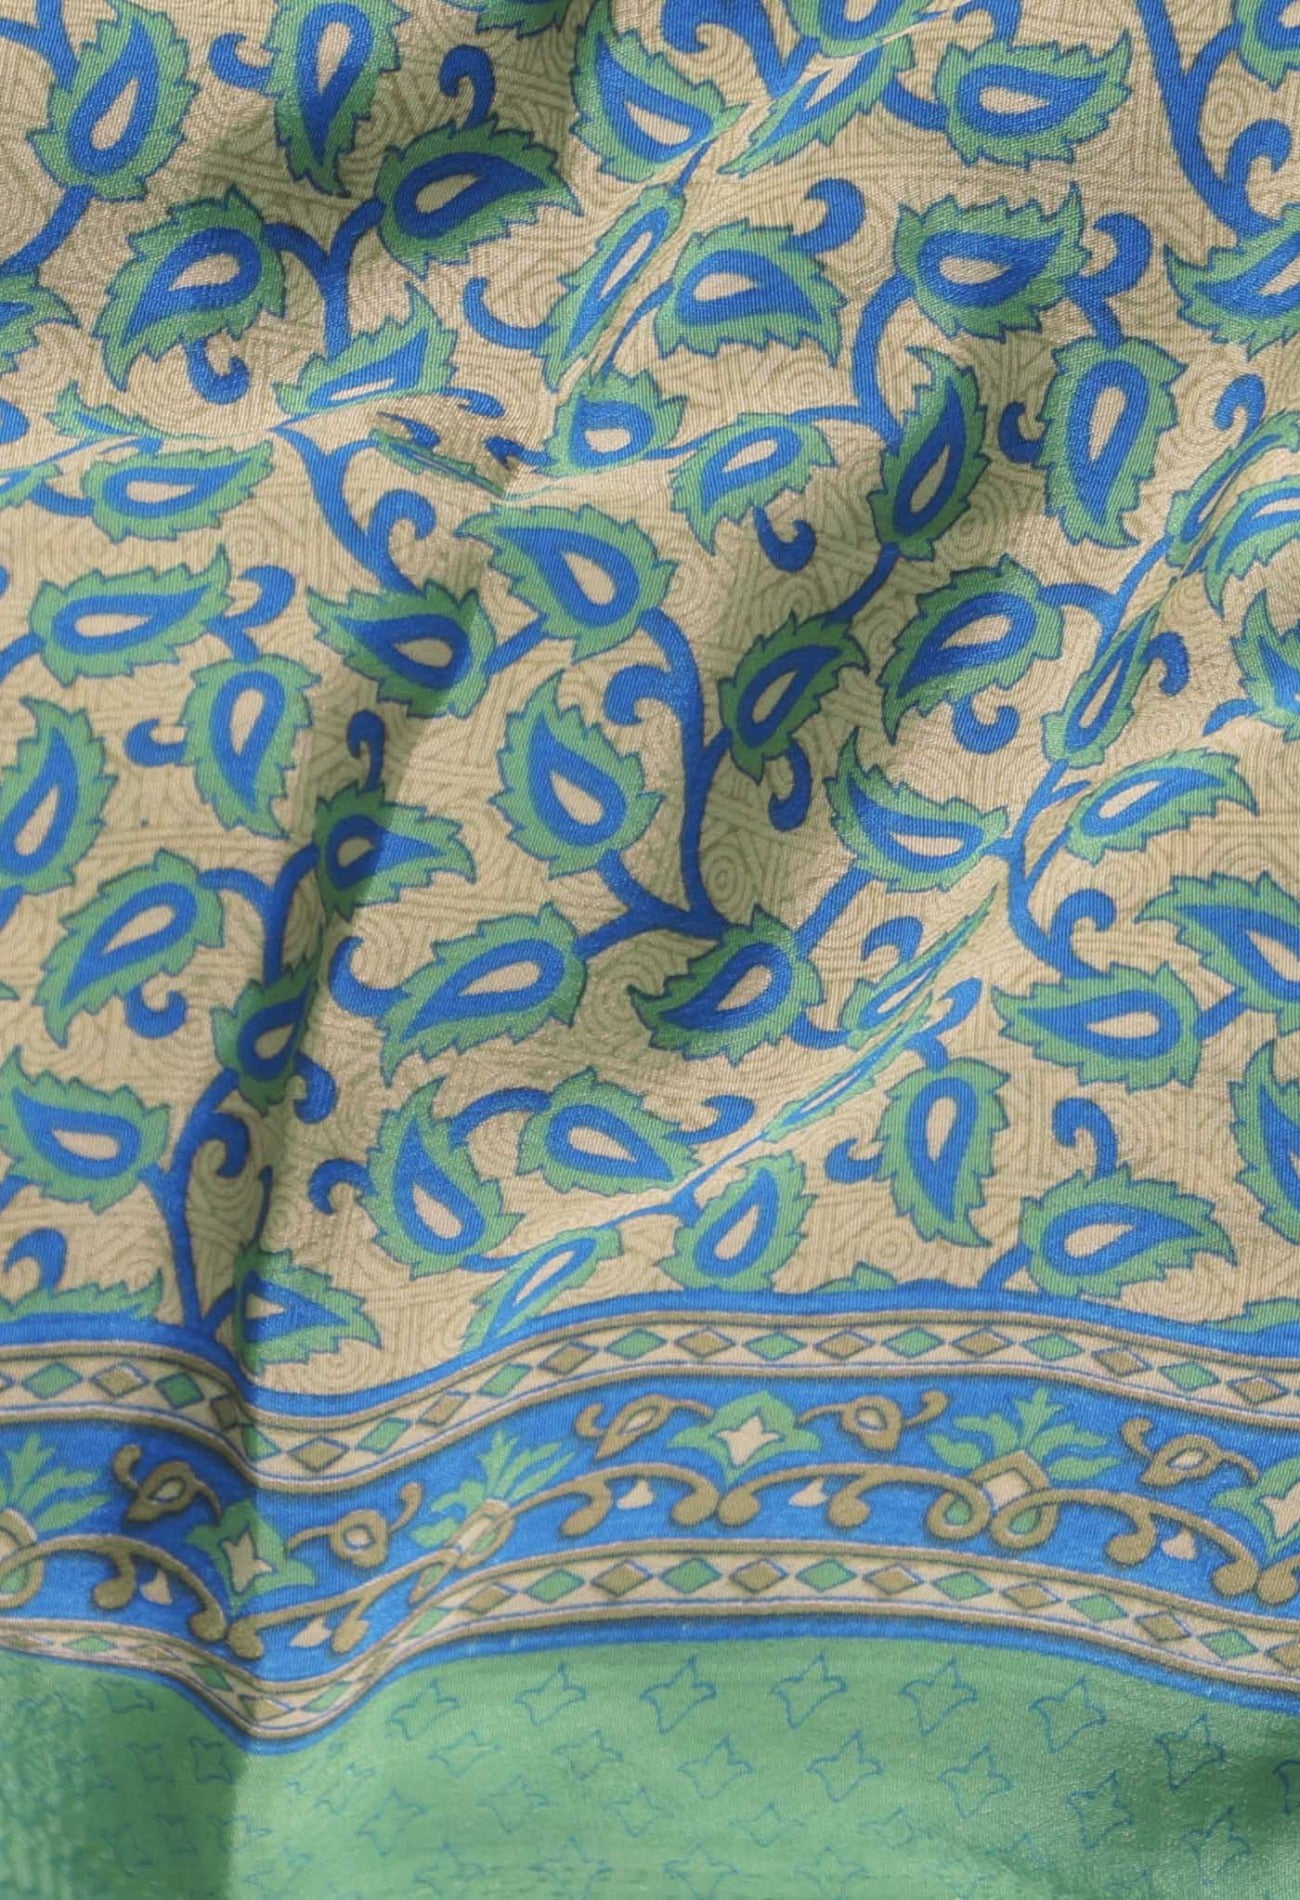 Online Shopping for Cream  Crepe Soft Silk Saree with Fancy/Ethnic Prints from Punjab at Unnatisilks.com India
